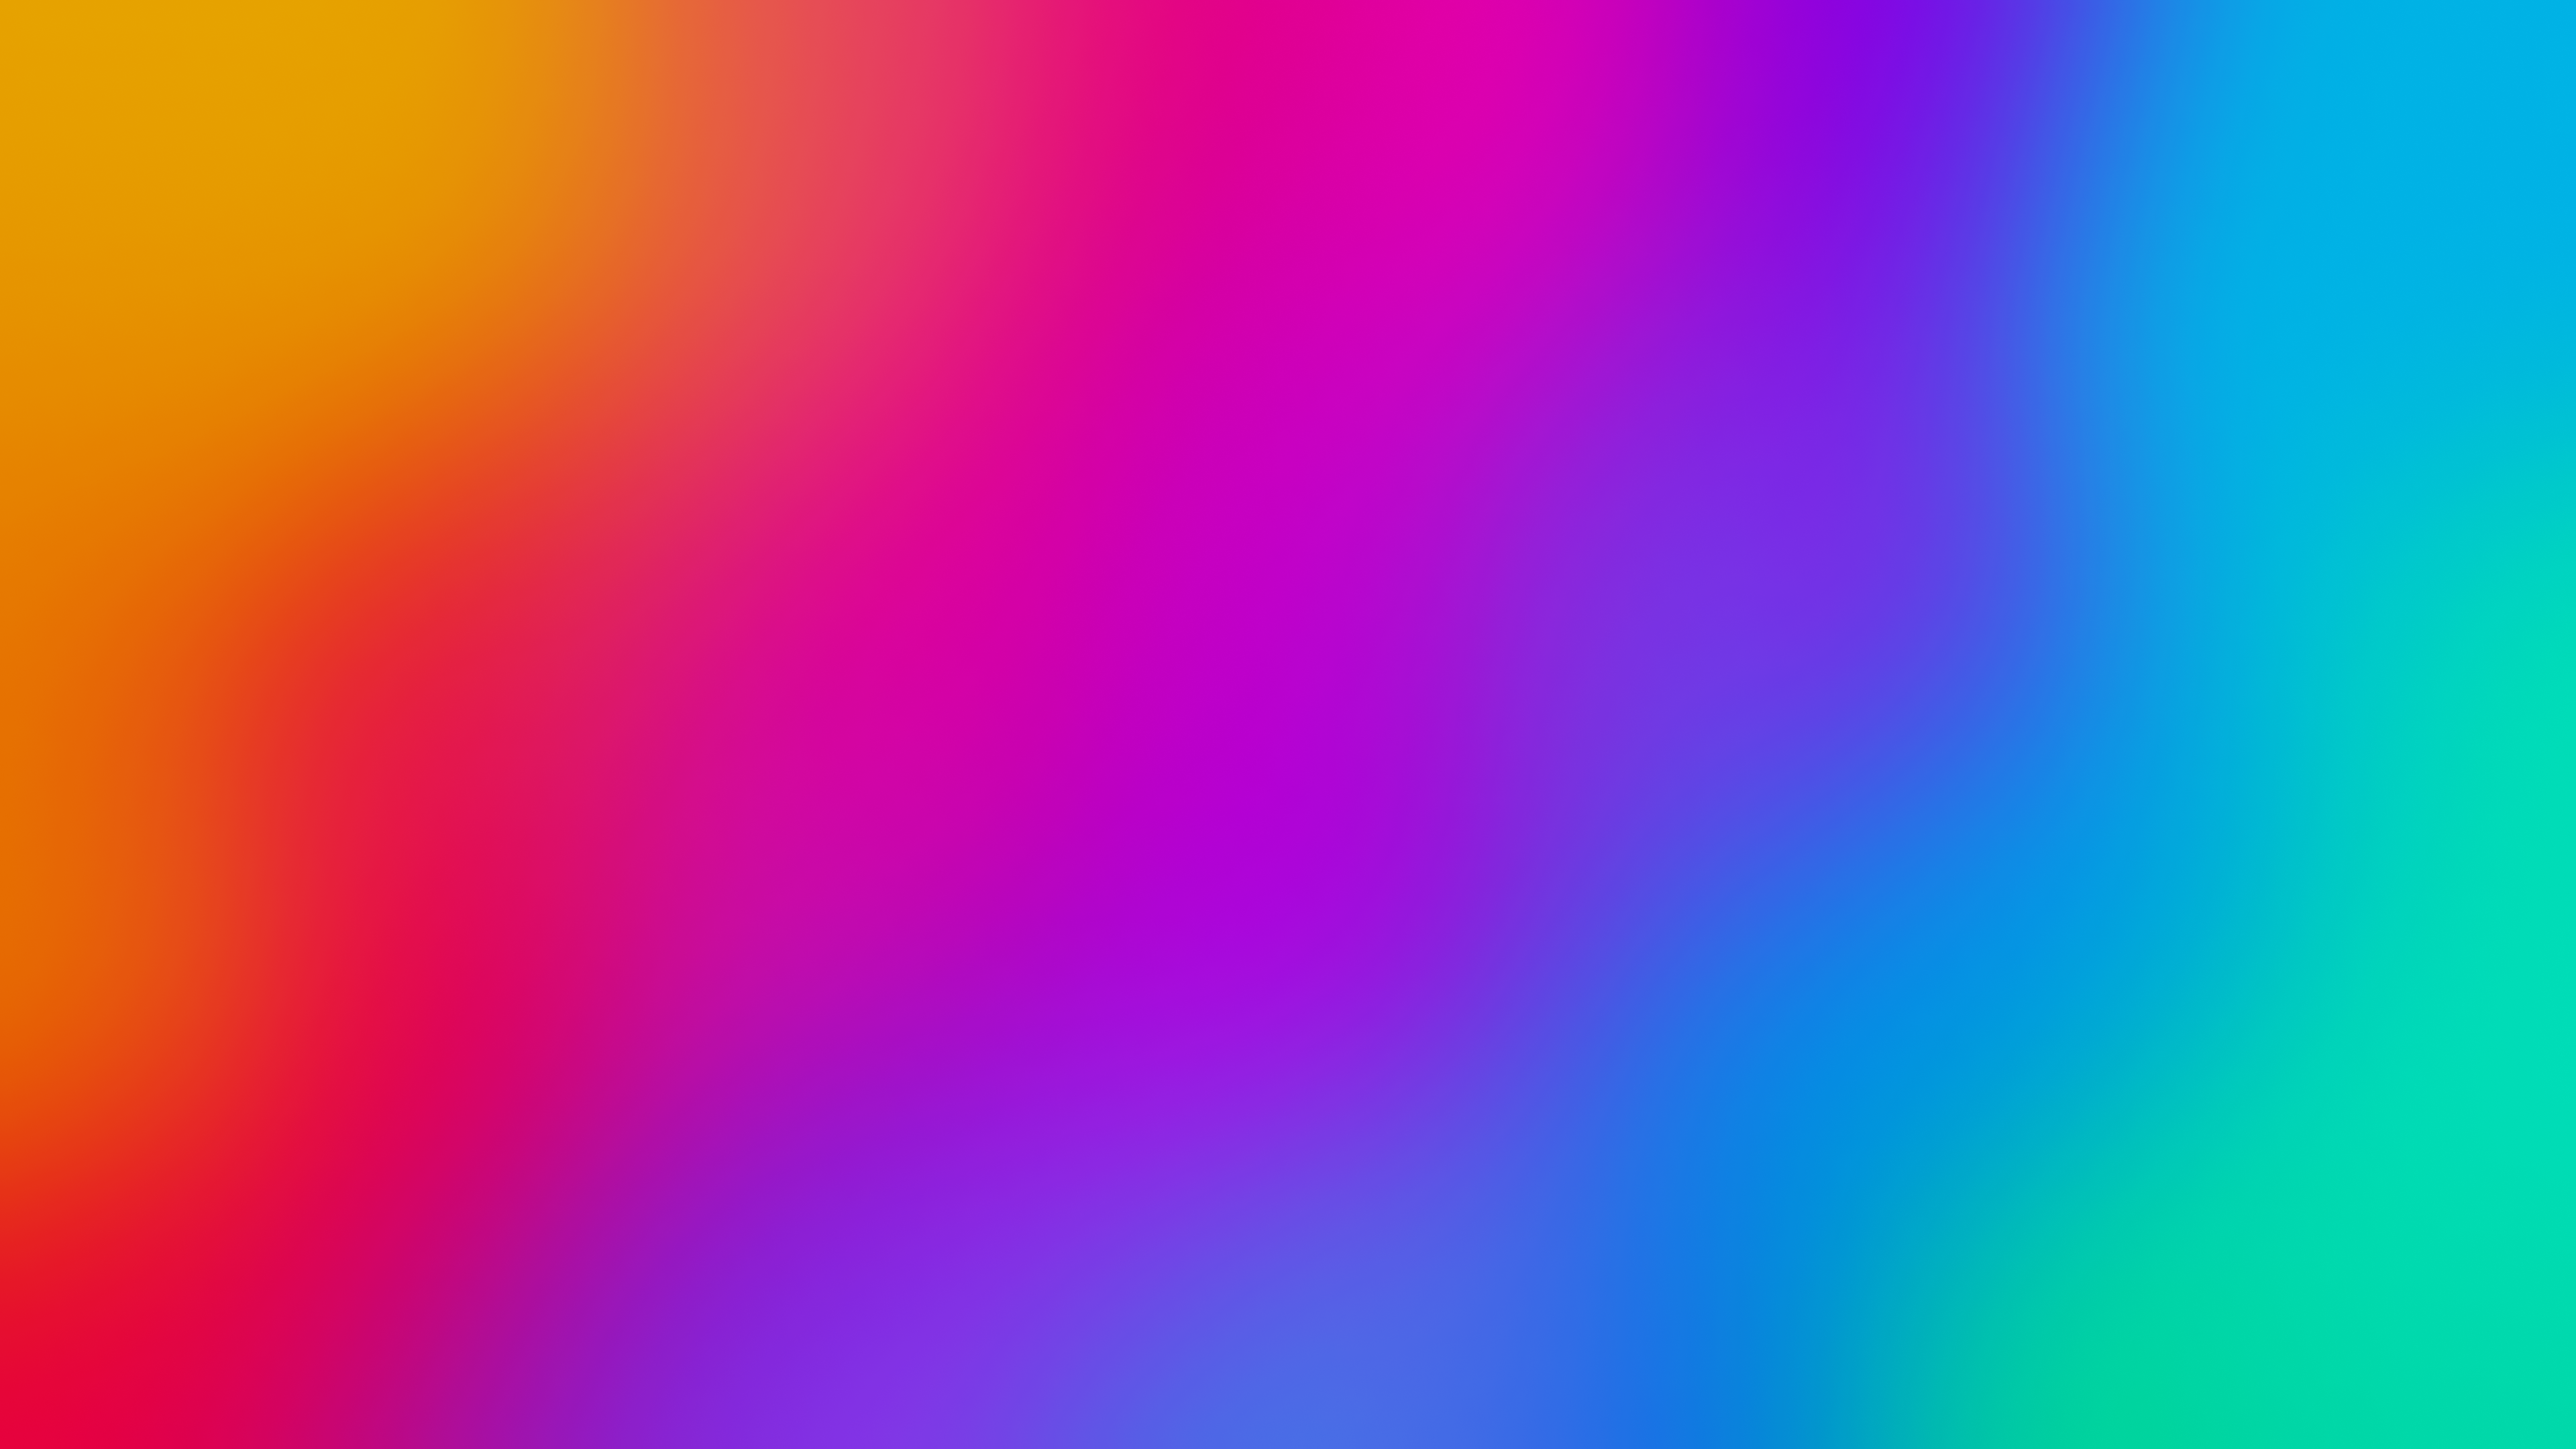 General 3840x2160 colorful blurred abstract minimalism